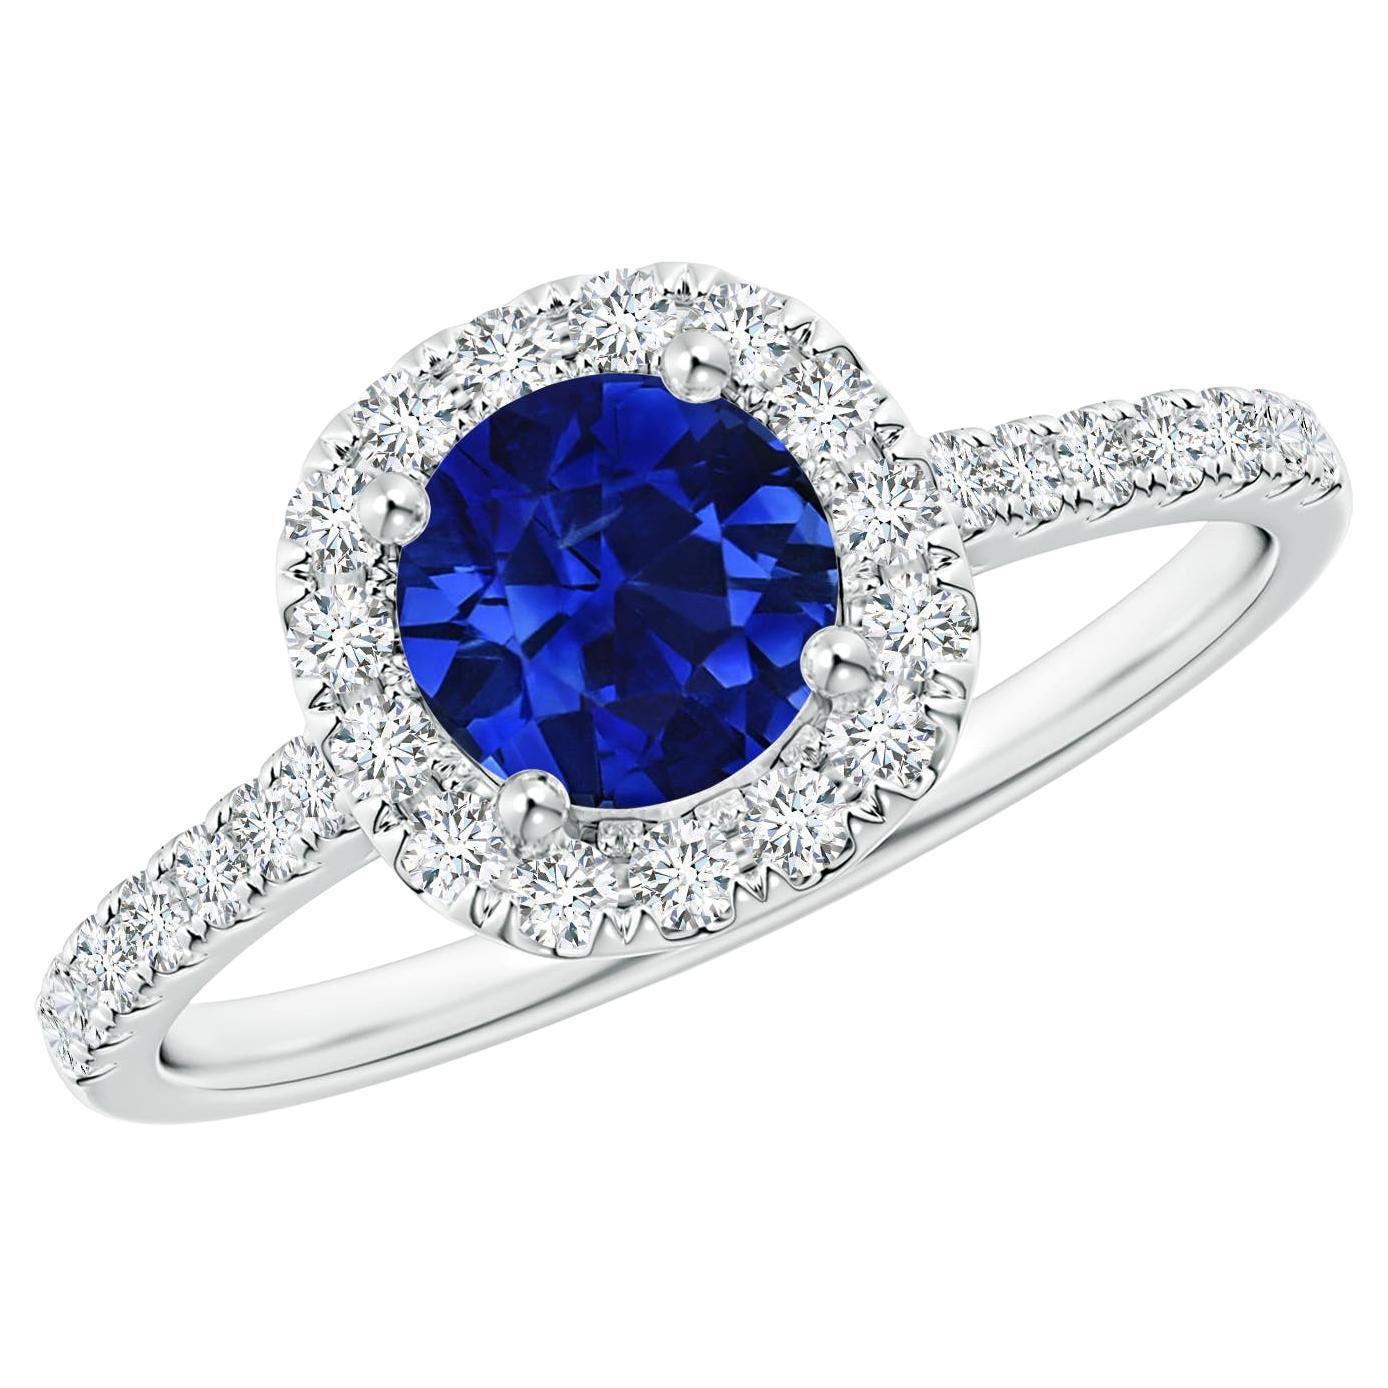 For Sale:  GIA Certified Natural Sapphire Halo White Gold Ring with Diamond Accents